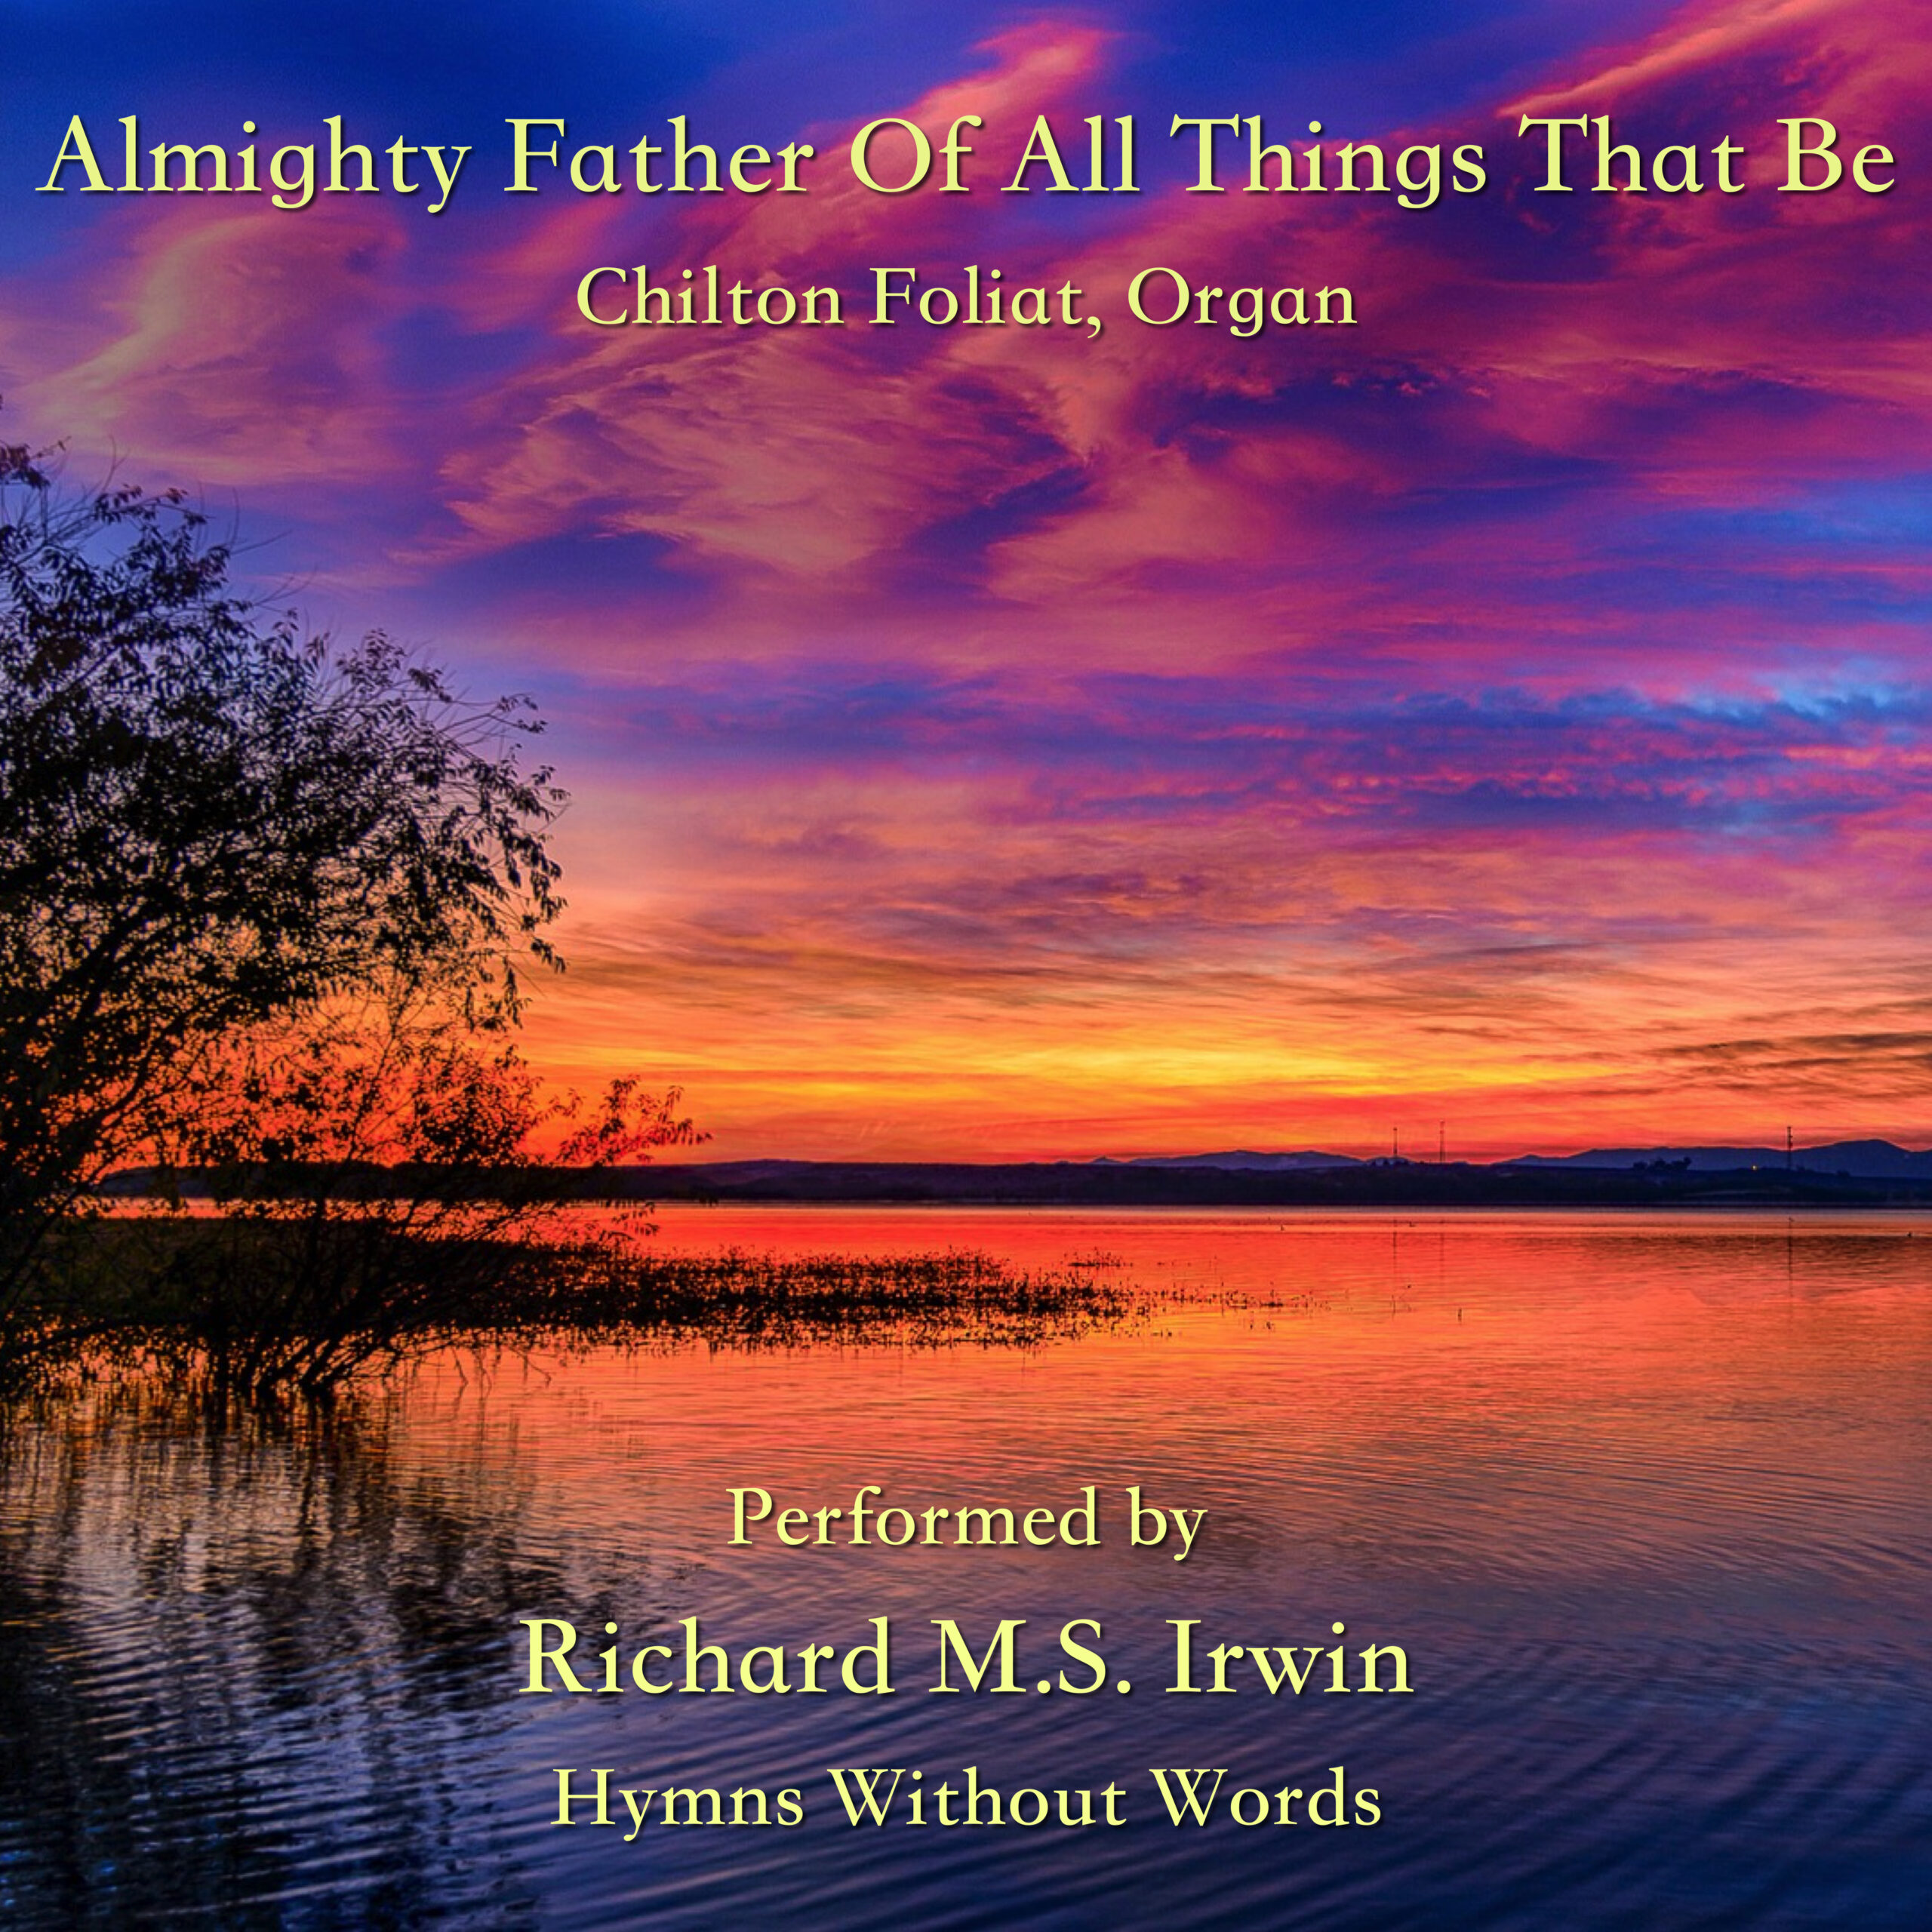 Almighty Father Of All Things To Be (Chilton Foliat, Organ)